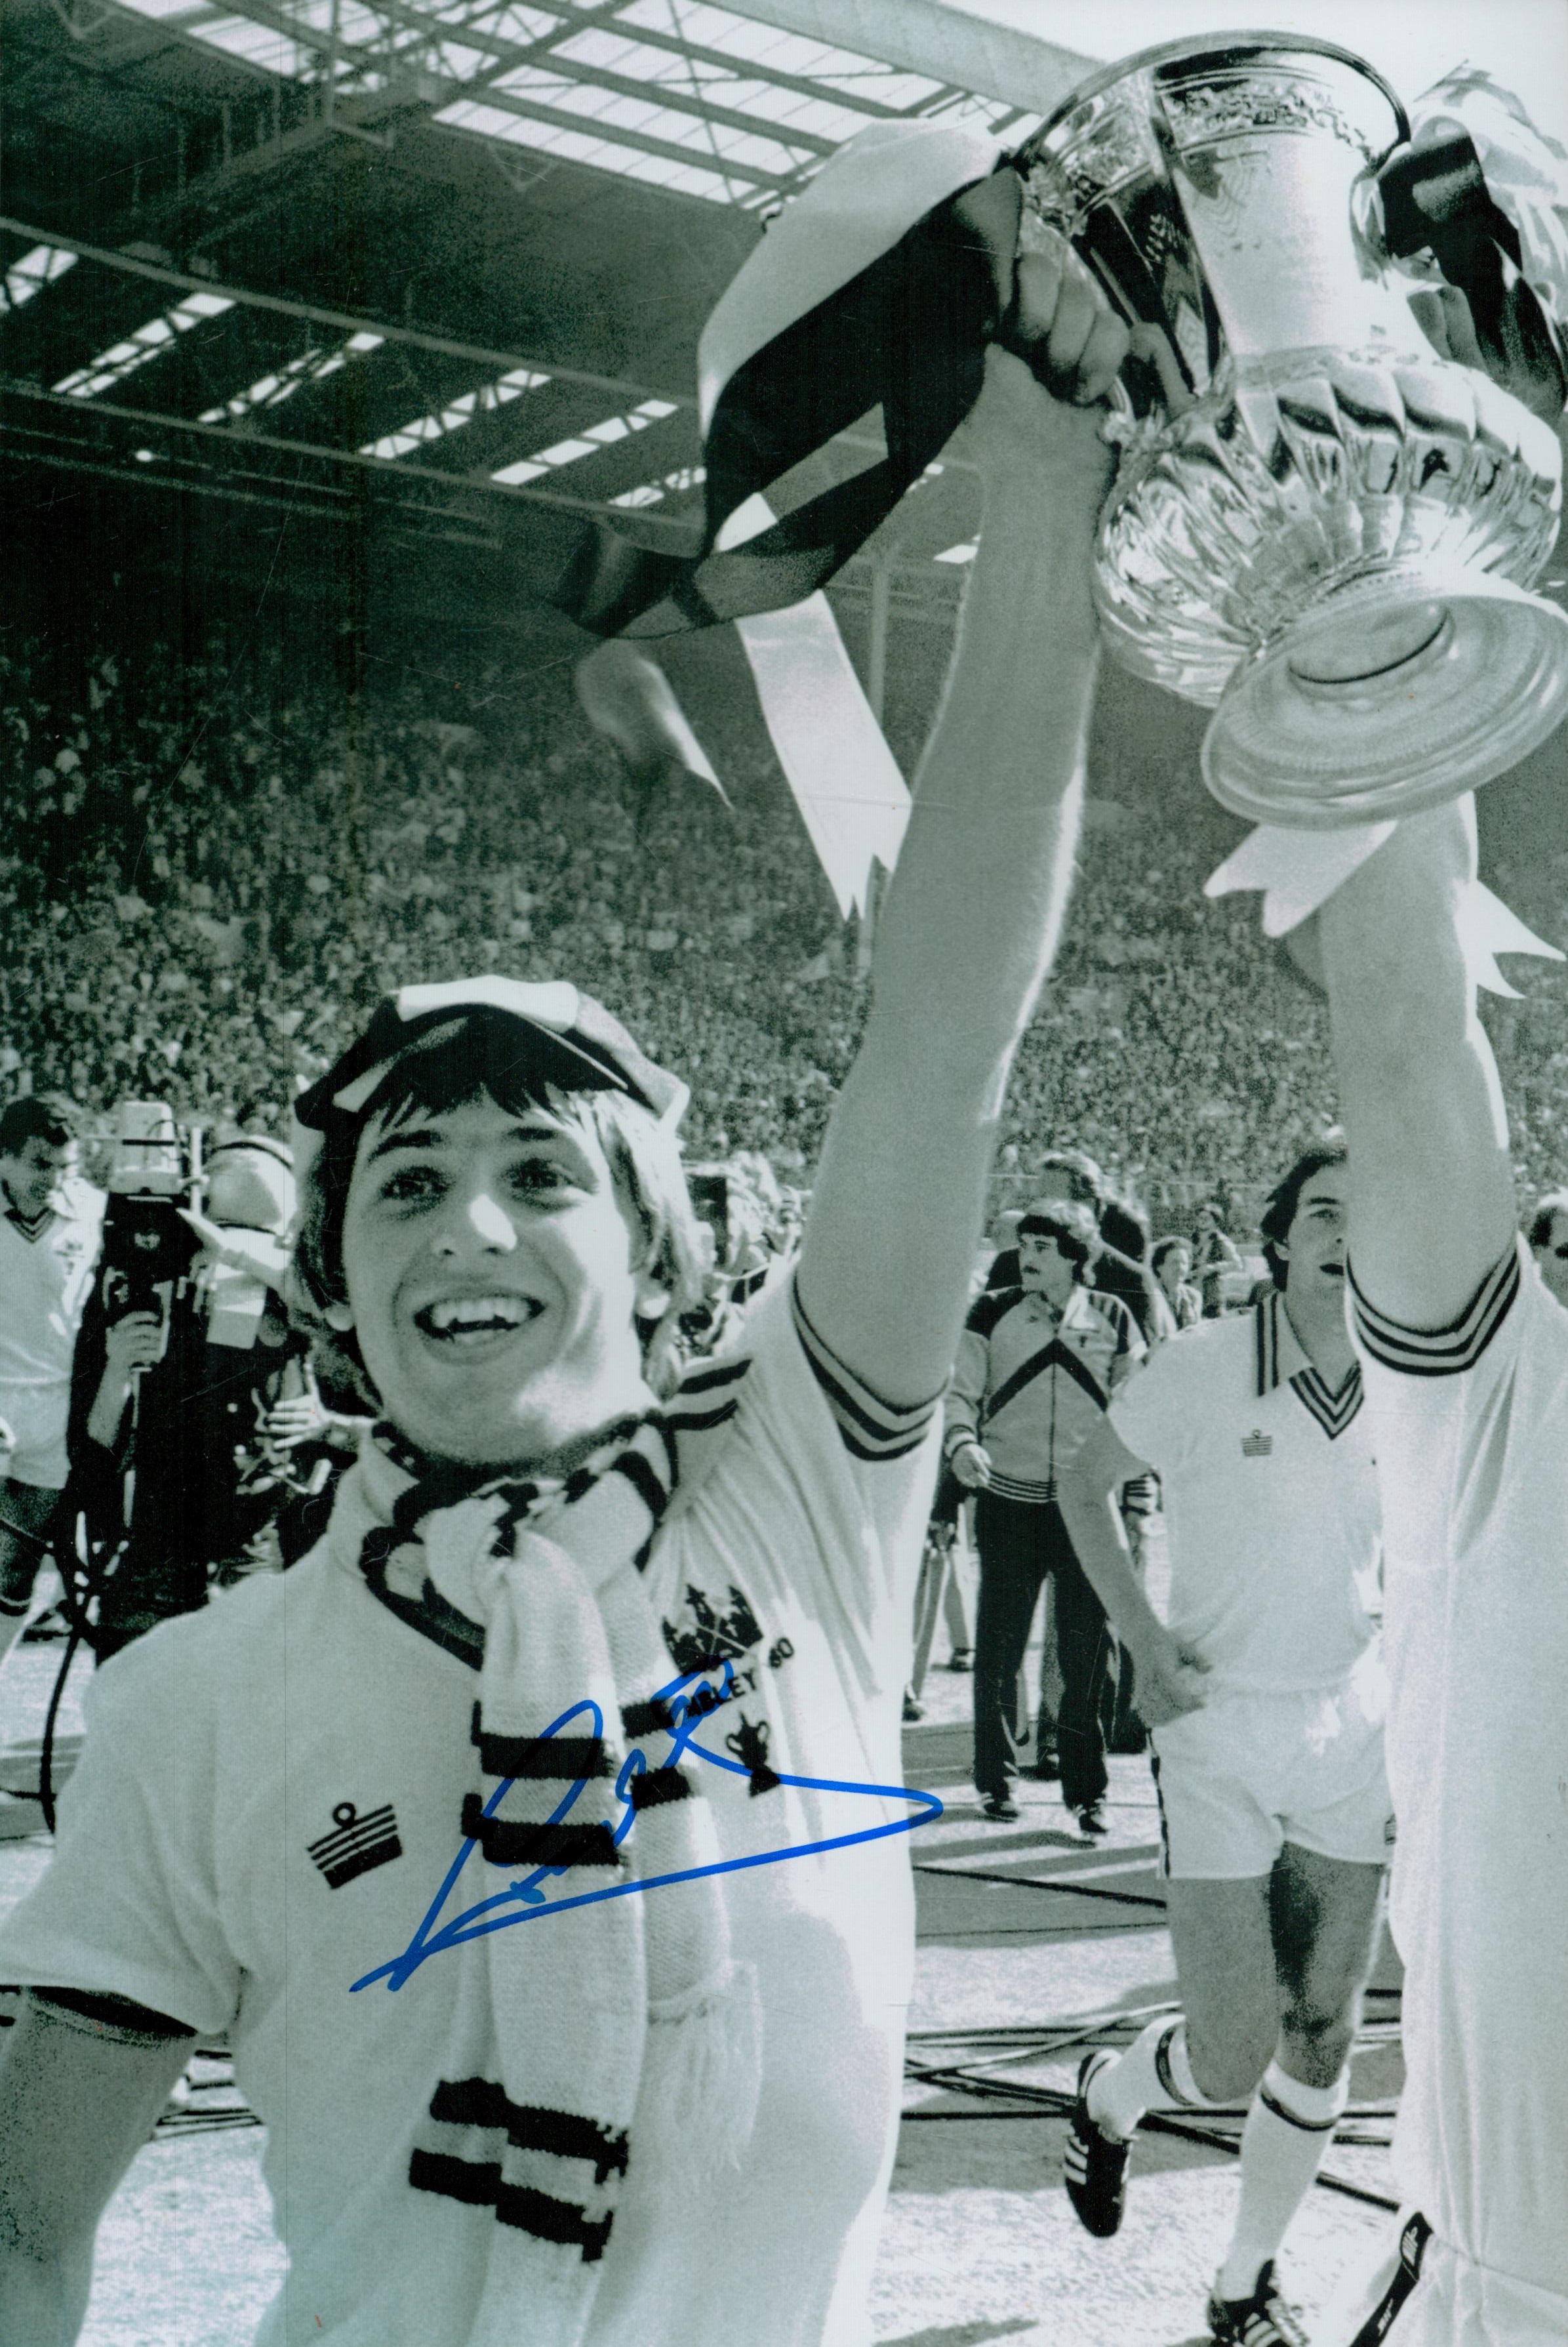 Geoff Pike signed Black and White Photo 12x8 Inch. 'West Ham United FA Cup 1980'. Good condition.